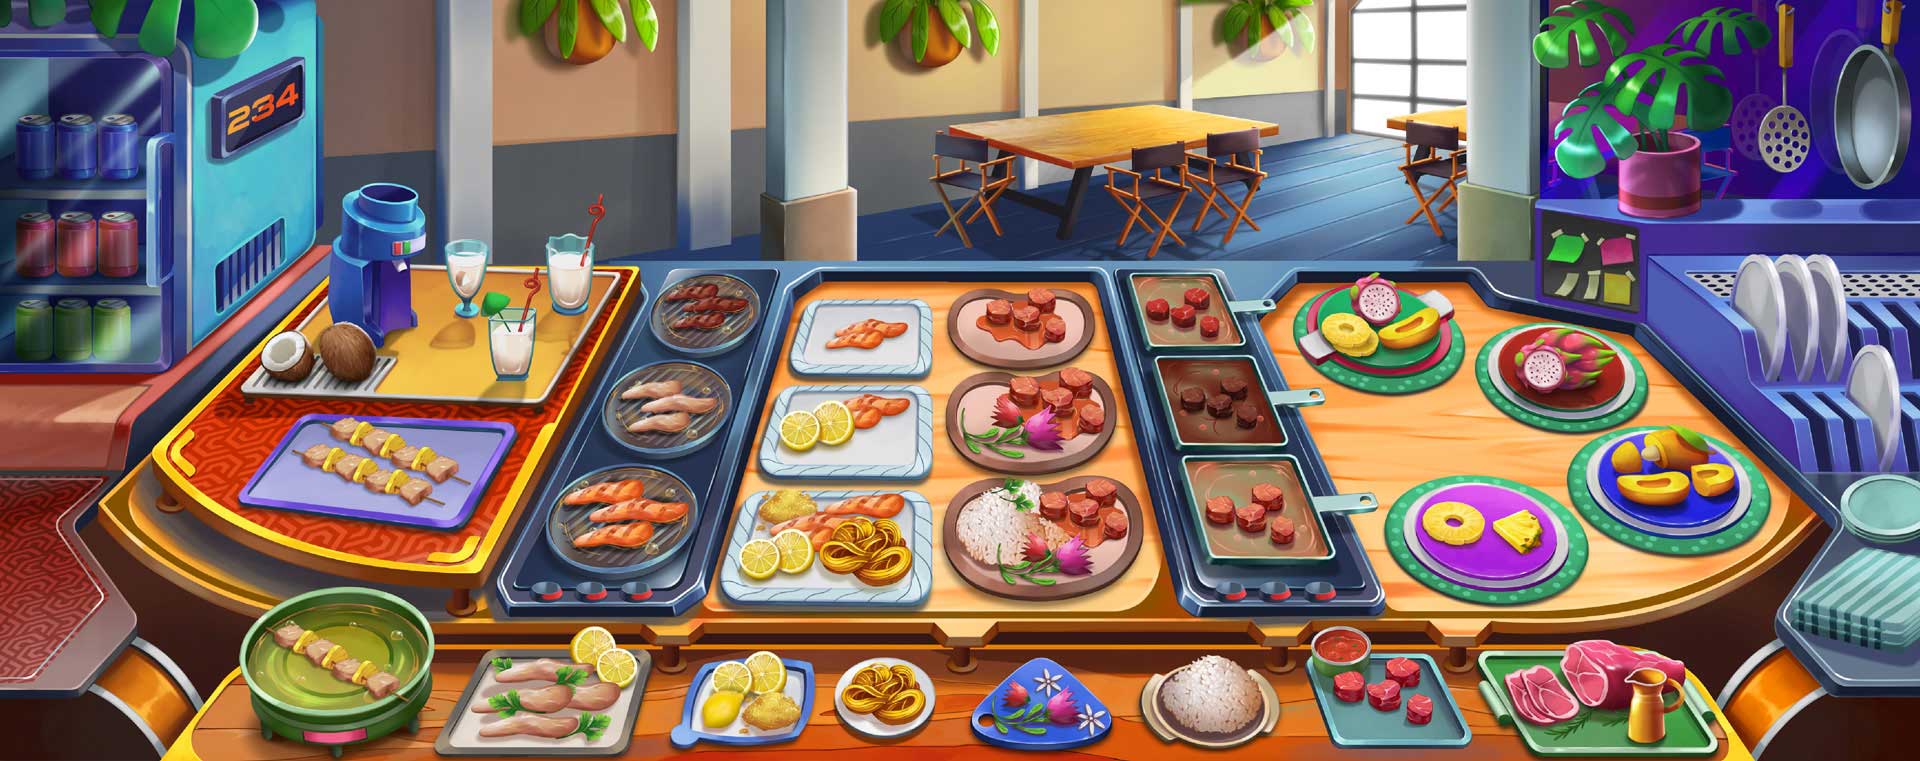 Game illustration of a restaurant environment with a table full of food.